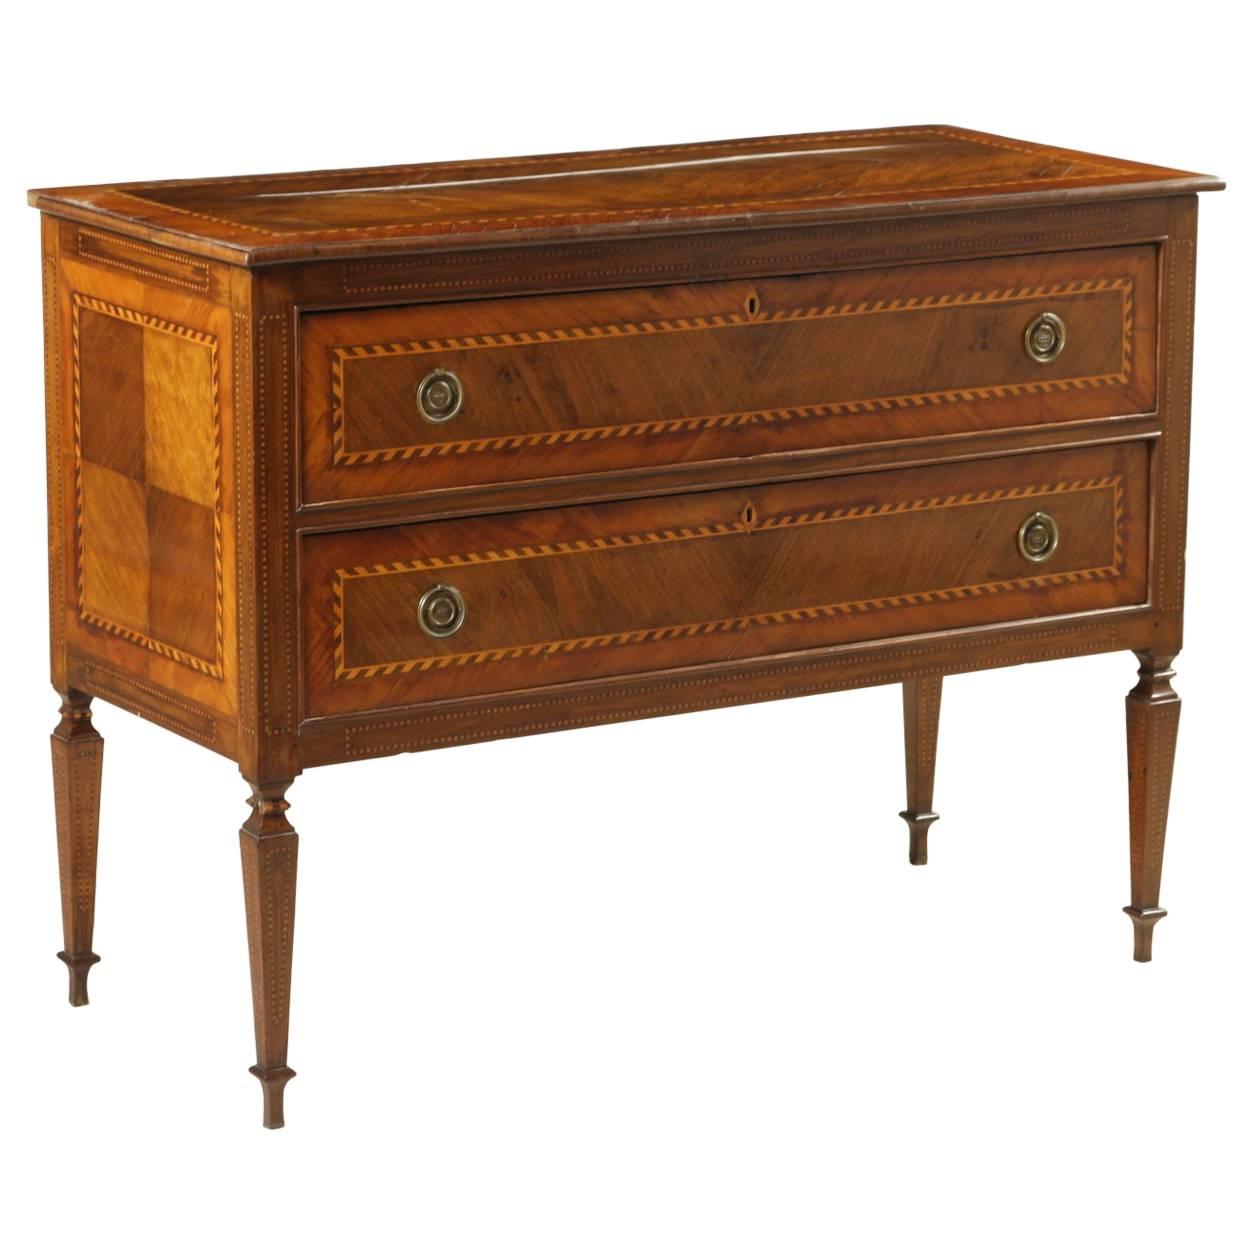 Elegant Late 18th Century Neoclassical Walnut and Cherry Chest of Drawers